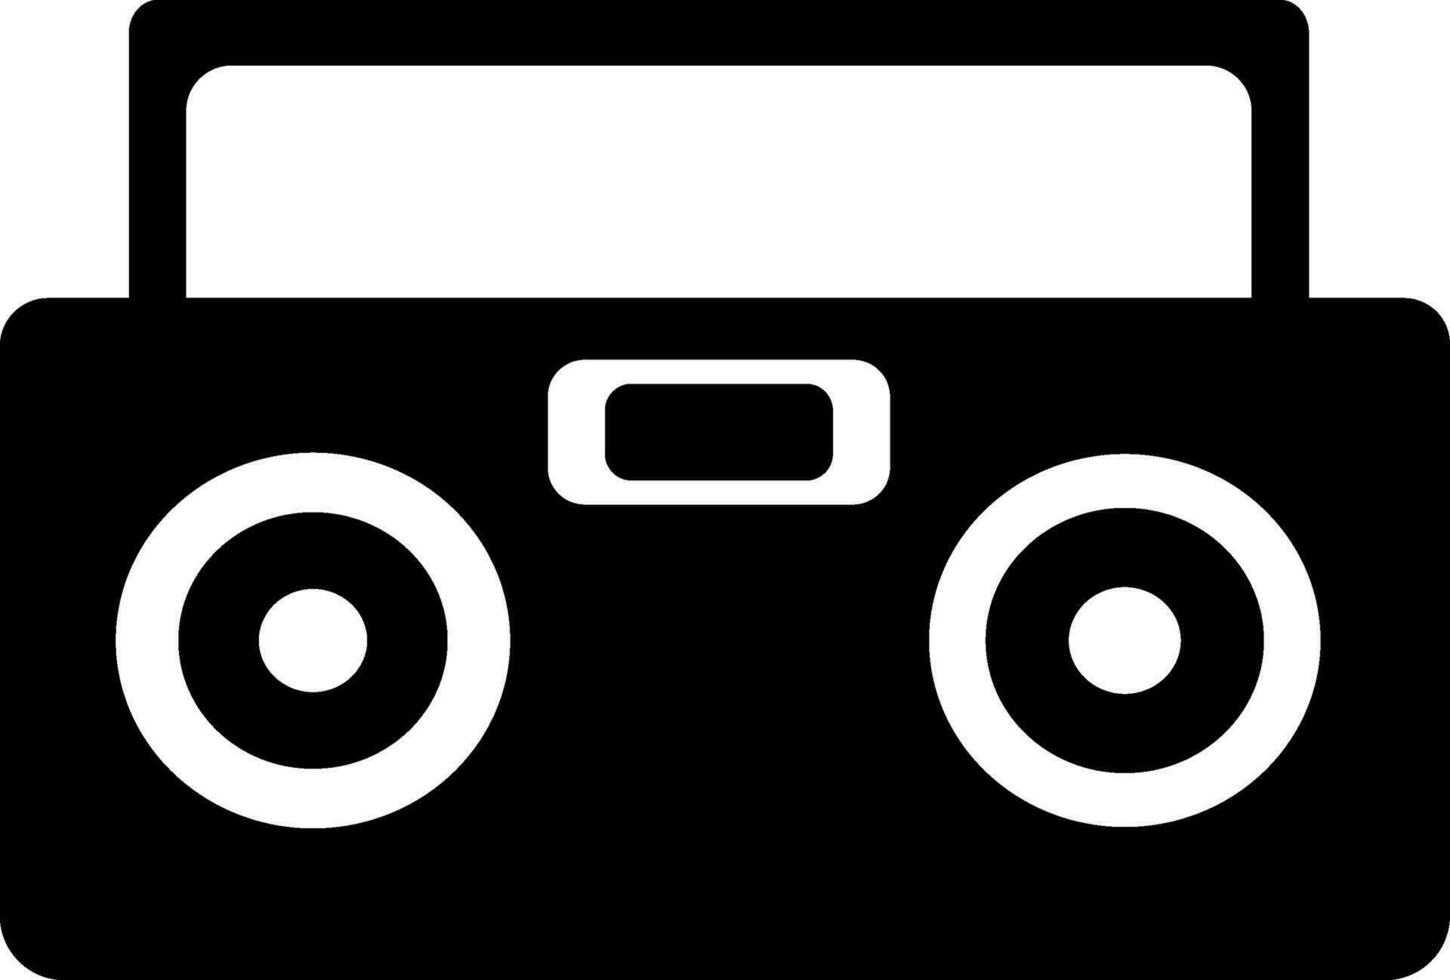 Tape Recorder glyph icon in flat style. vector